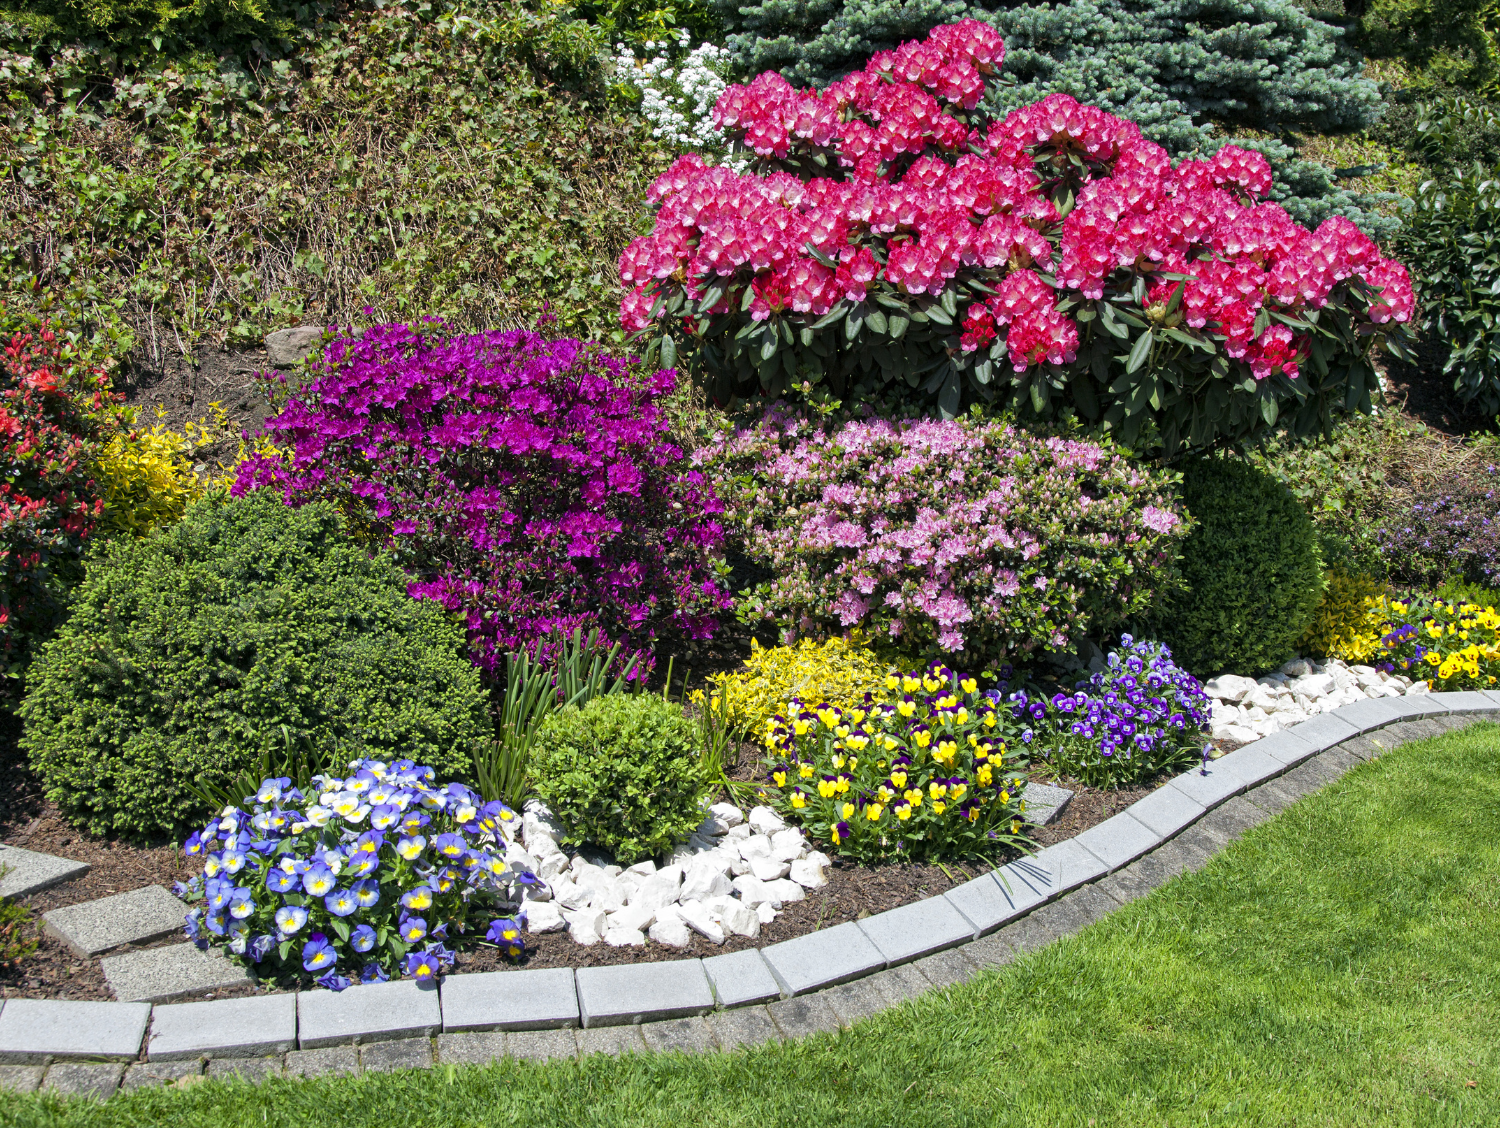 Garden Design with beautiful, colorful flowers and stone edging